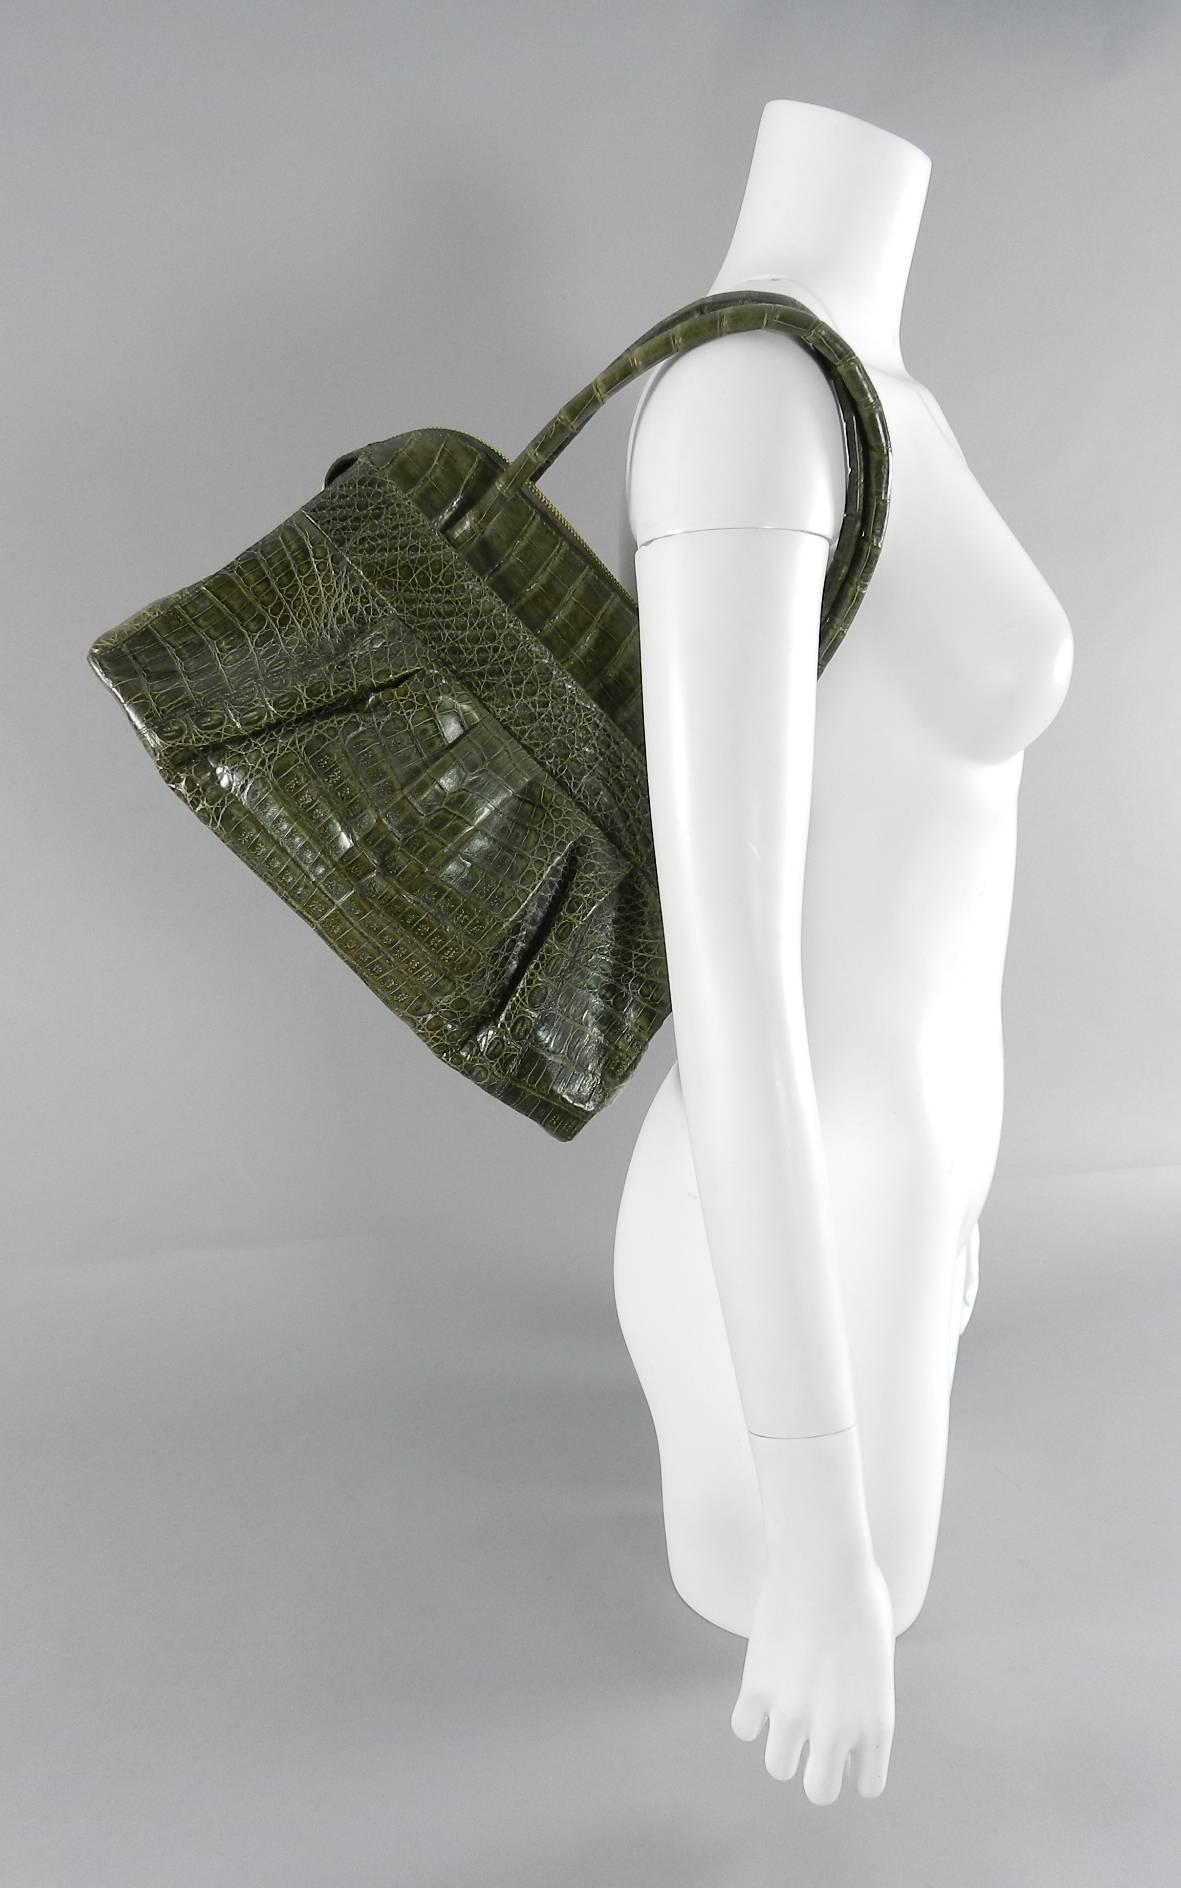 Nancy Gonzalez Dark Green Crocodile Bag.  Double top handle design with goldtone metal zipper.  Interior is lined with green suede. Includes duster. Excellent clean pre-owned condition.  Measures 13.5 x 9 x 5" with a 5.5" drop handle. 

We